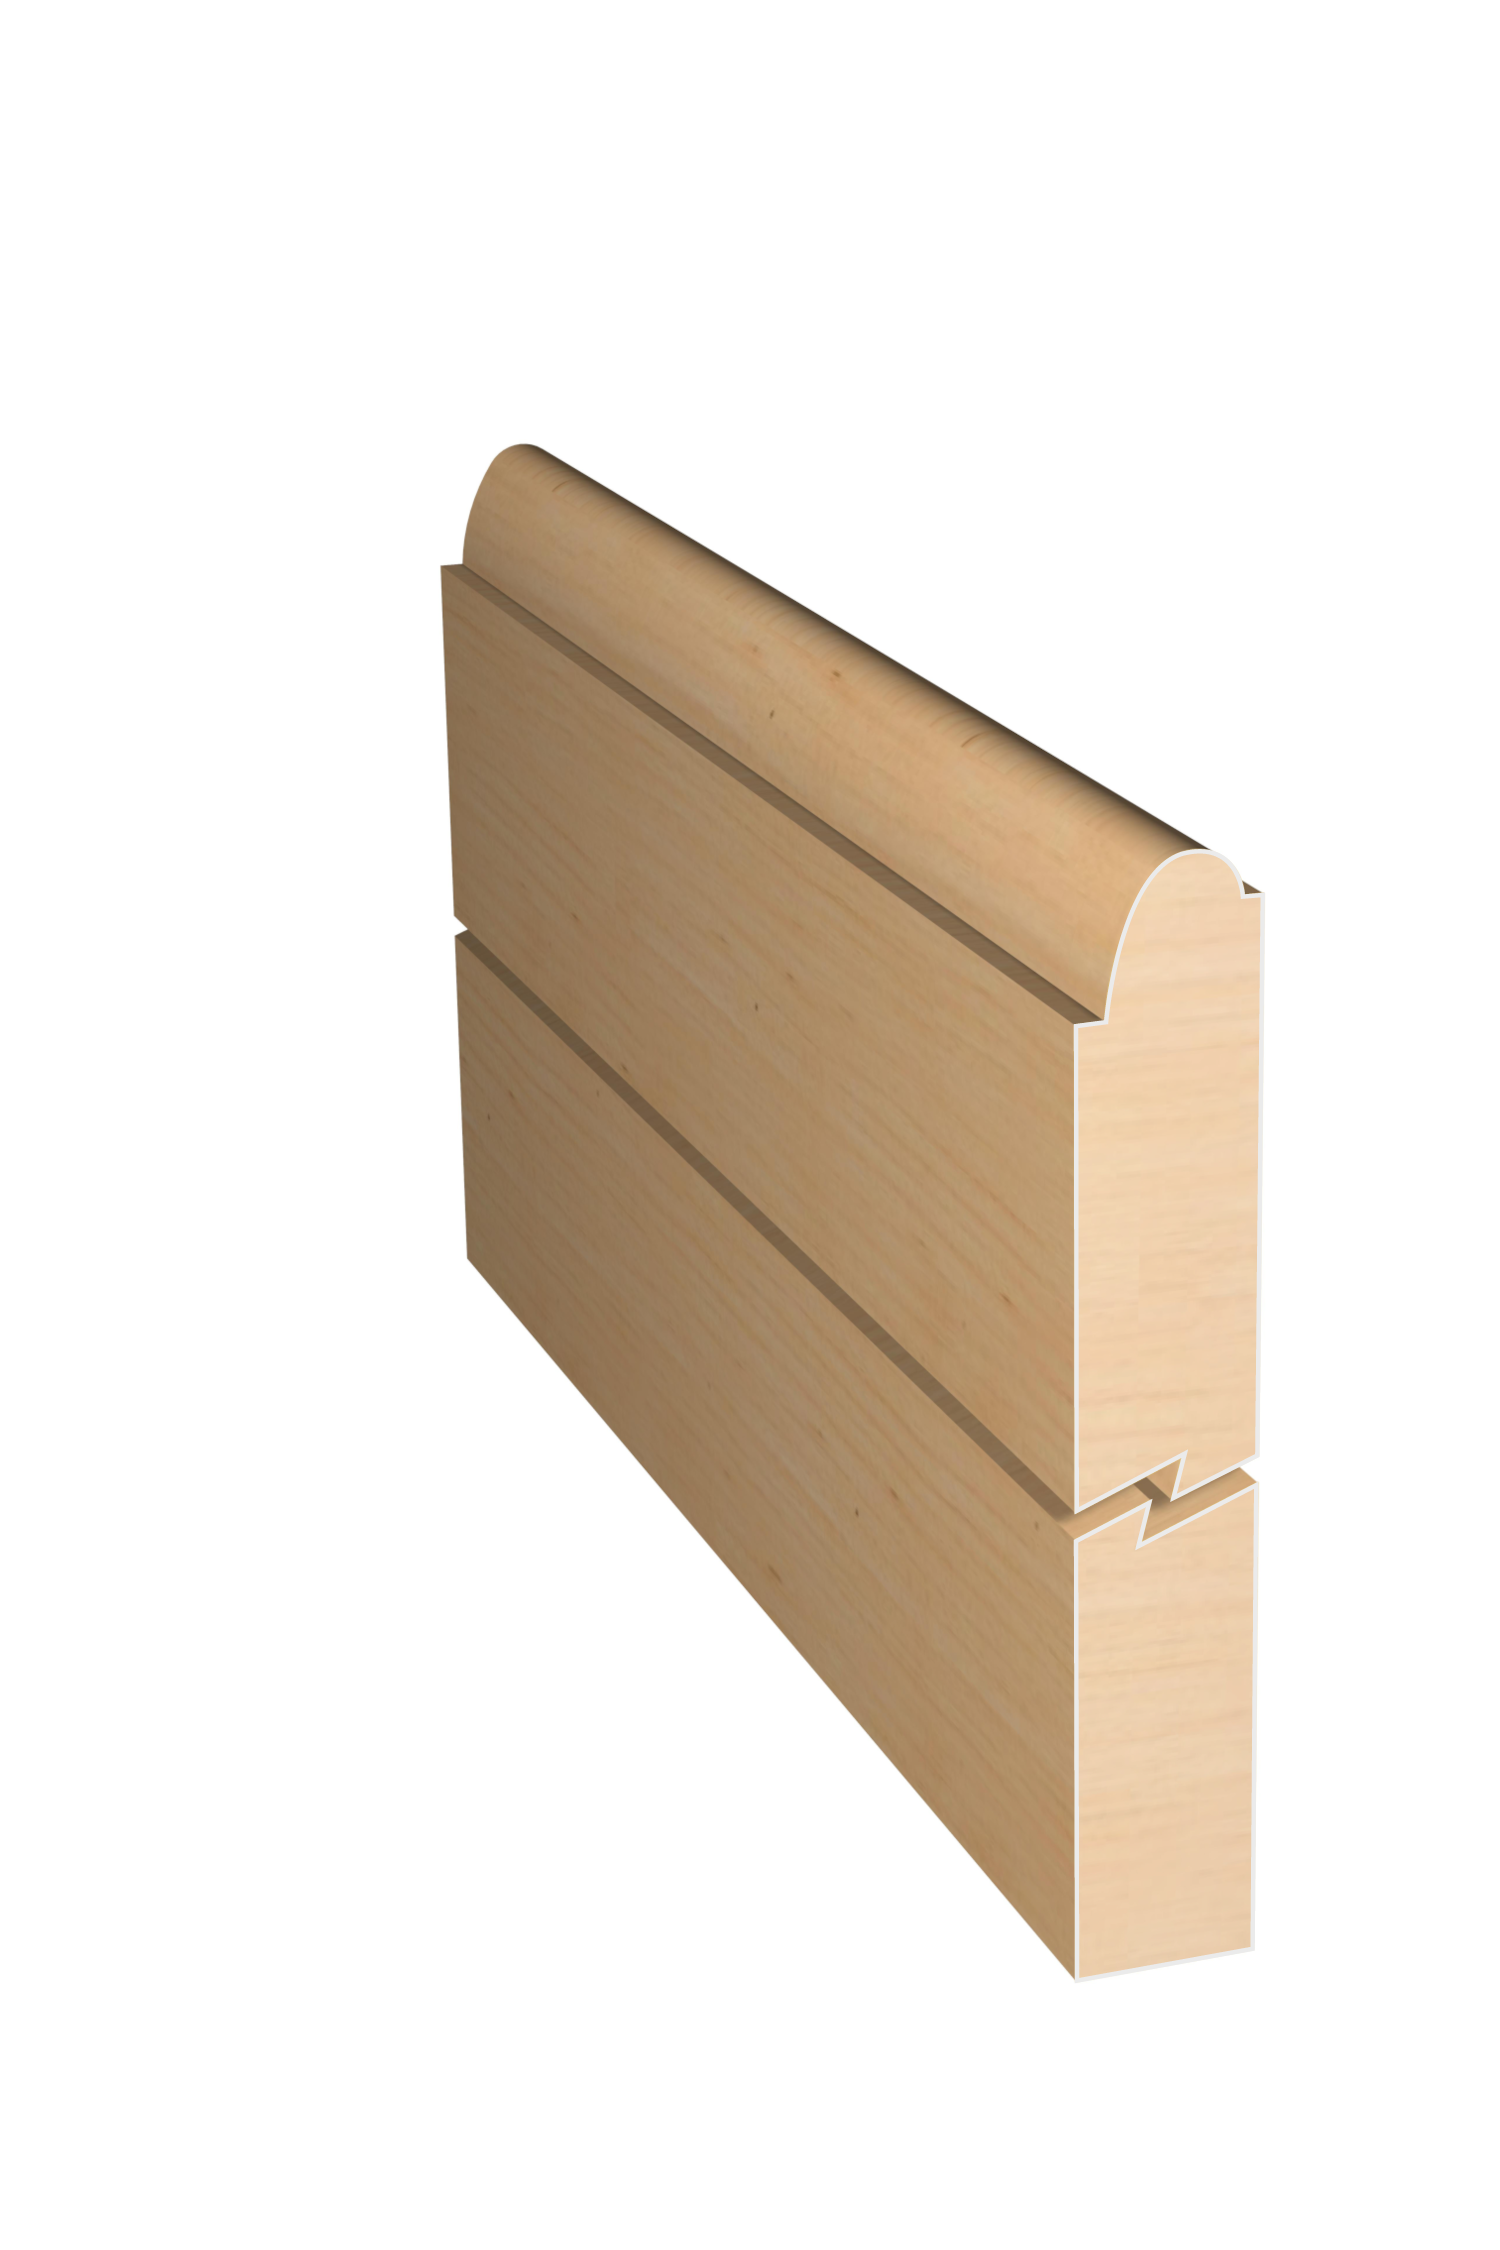 Three dimensional rendering of custom edge profile wood molding SKPL35 made by Public Lumber Company in Detroit.